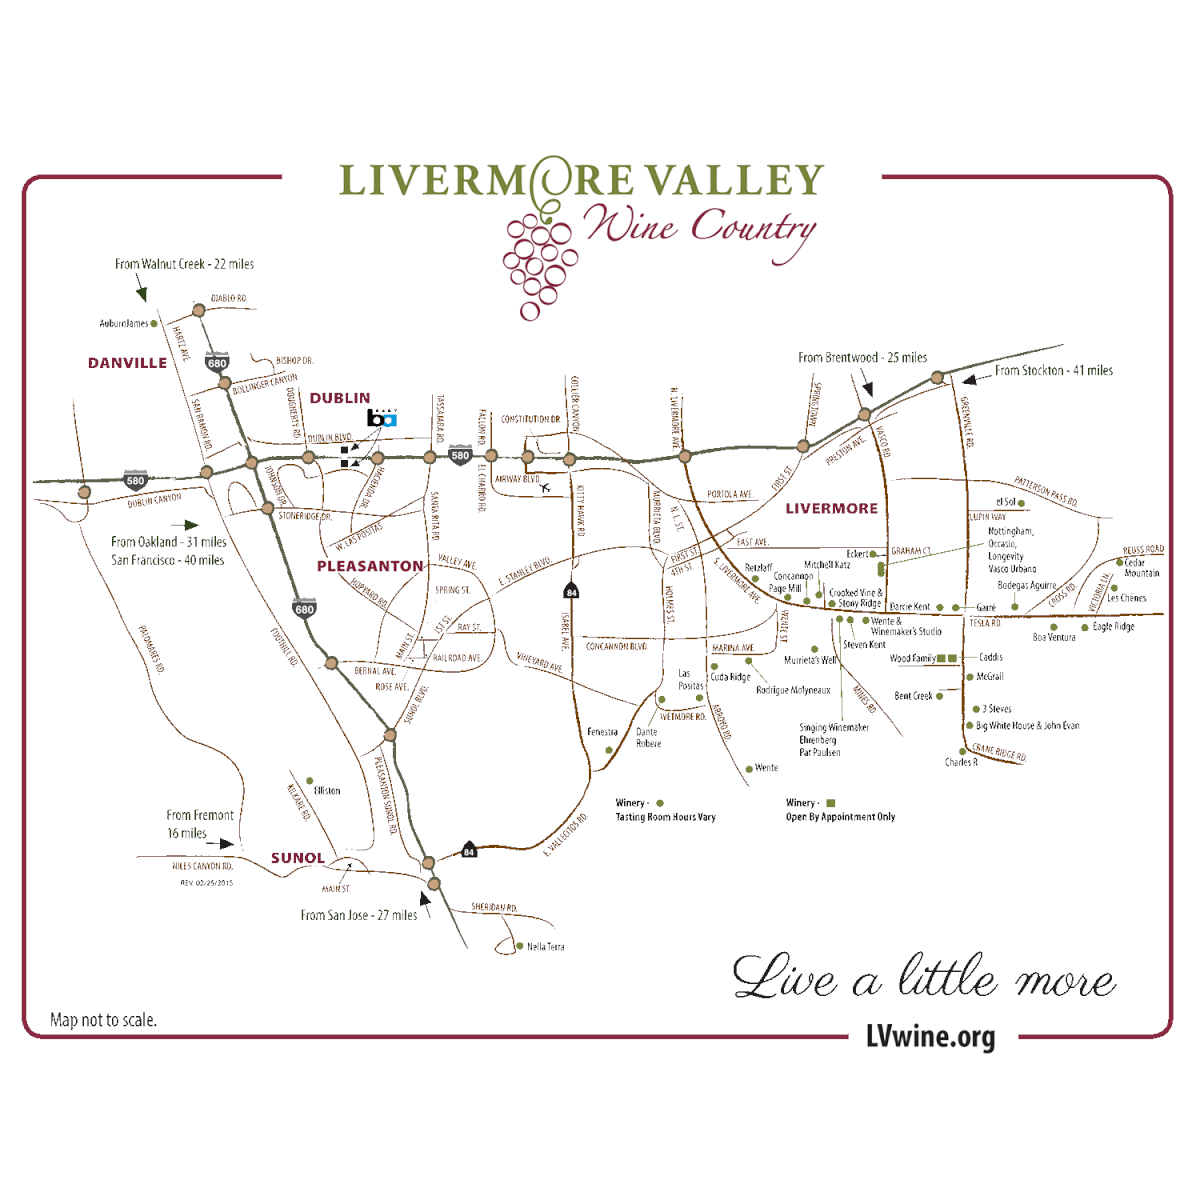 Congratulations, Livermore Valley Wineries!